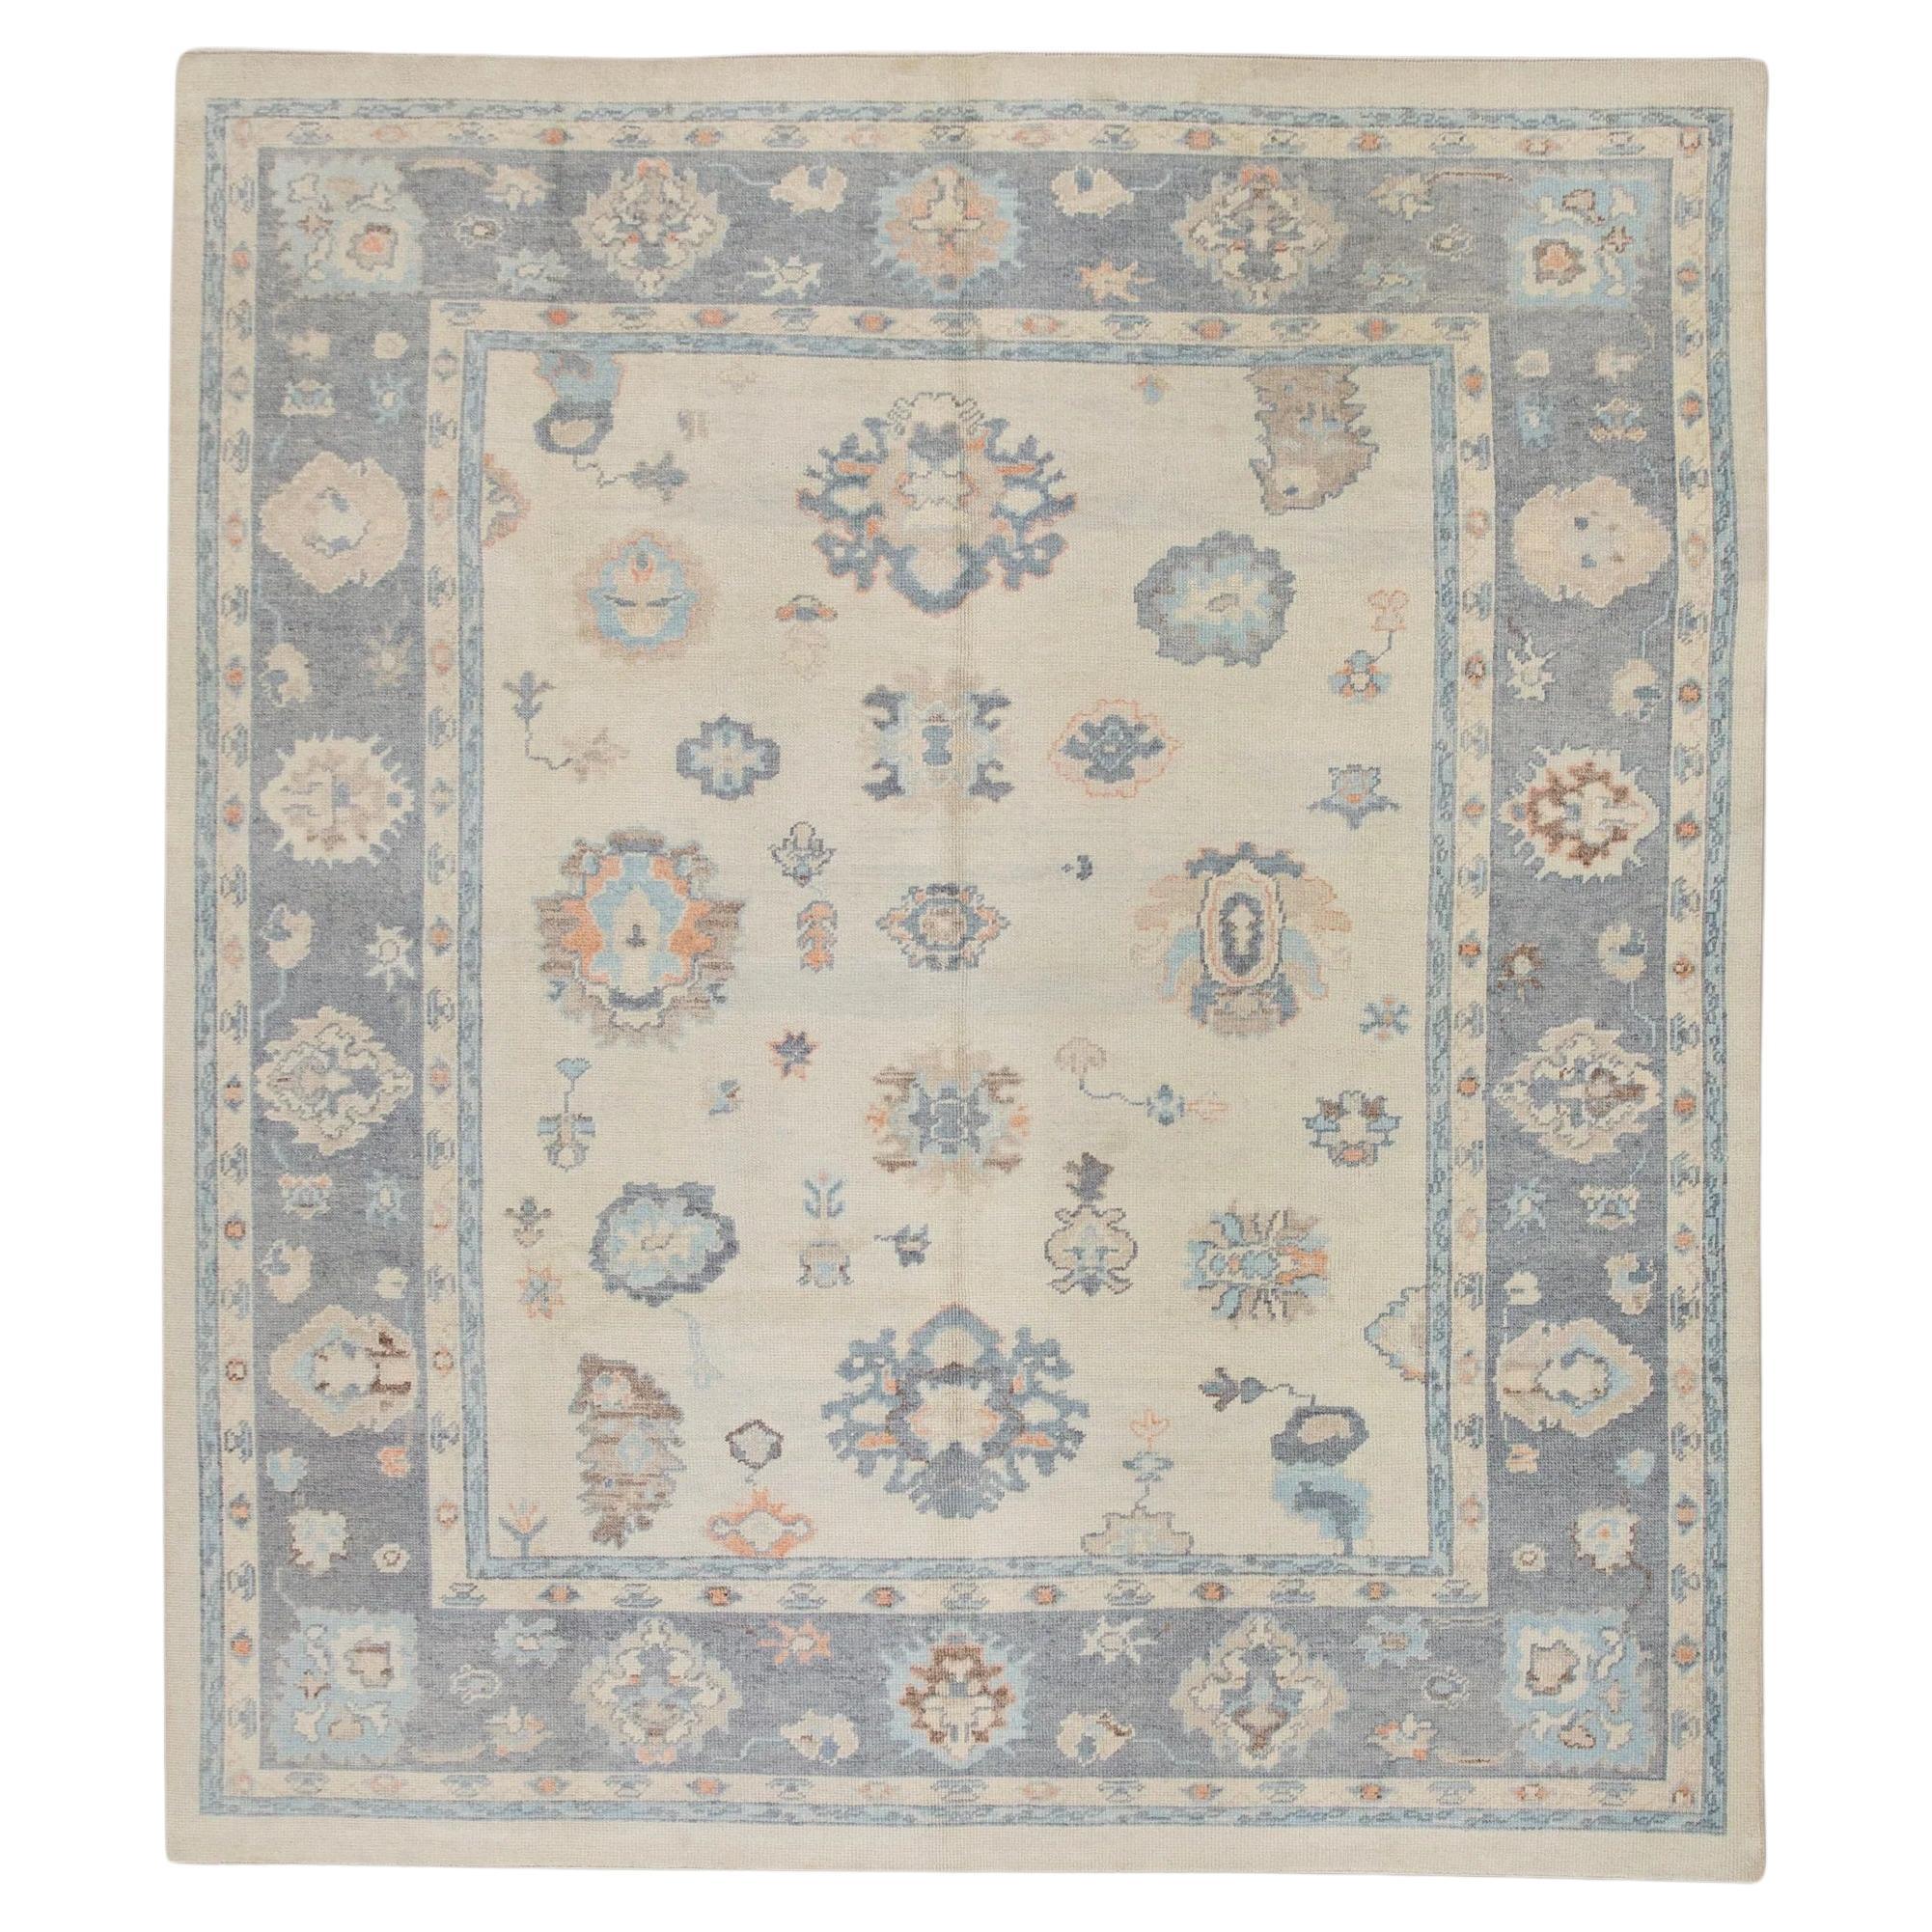 Blue & Gray Handwoven Wool Turkish Oushak Rug 8'5" x 10'1" For Sale